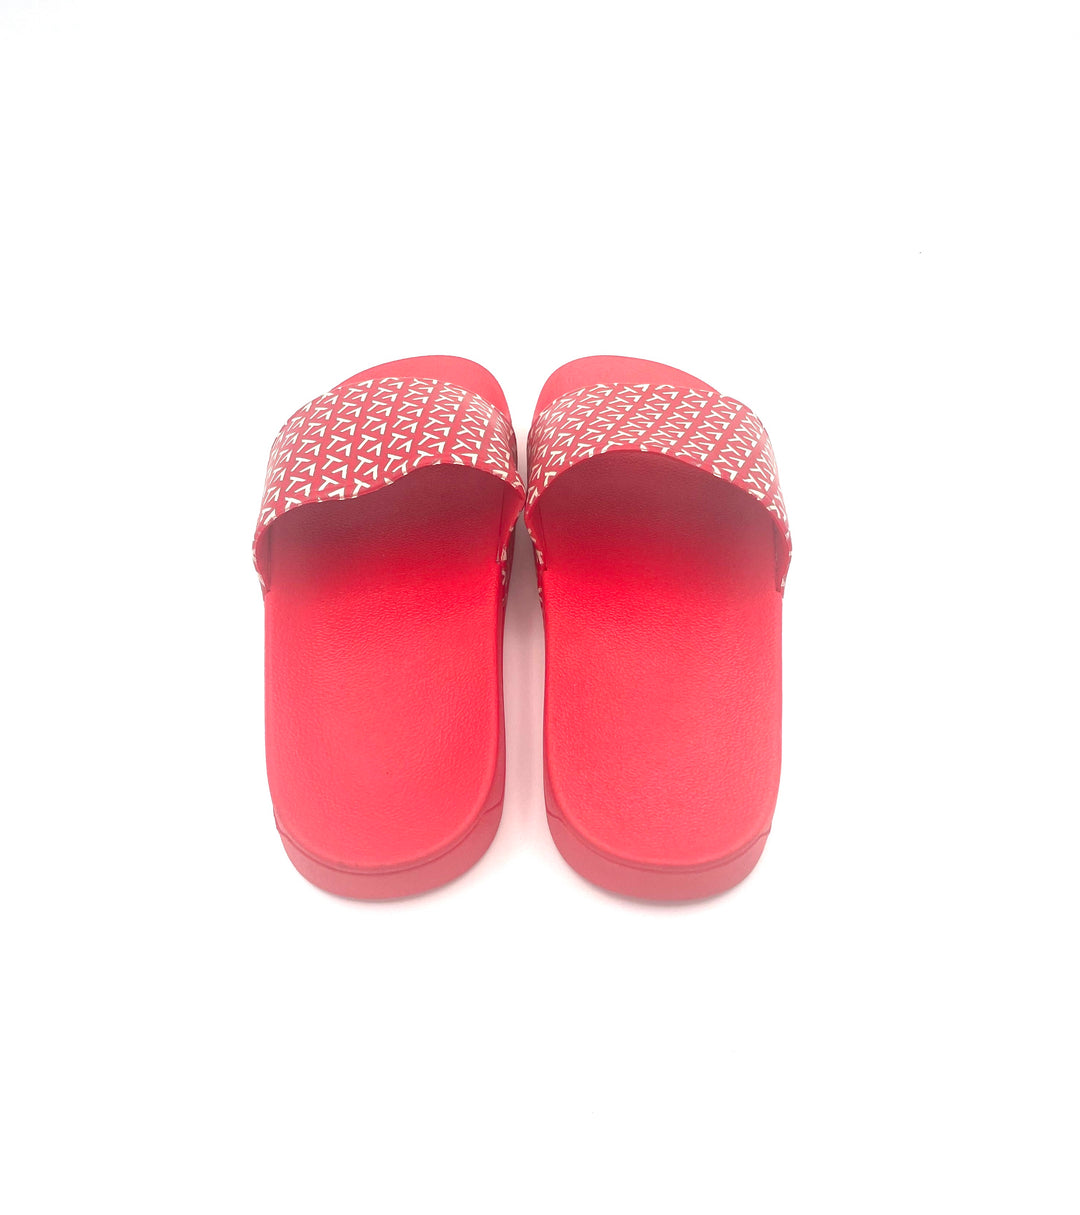 Red TA Logo Slides - Size 5, 6, 7, 8, 9 and 10